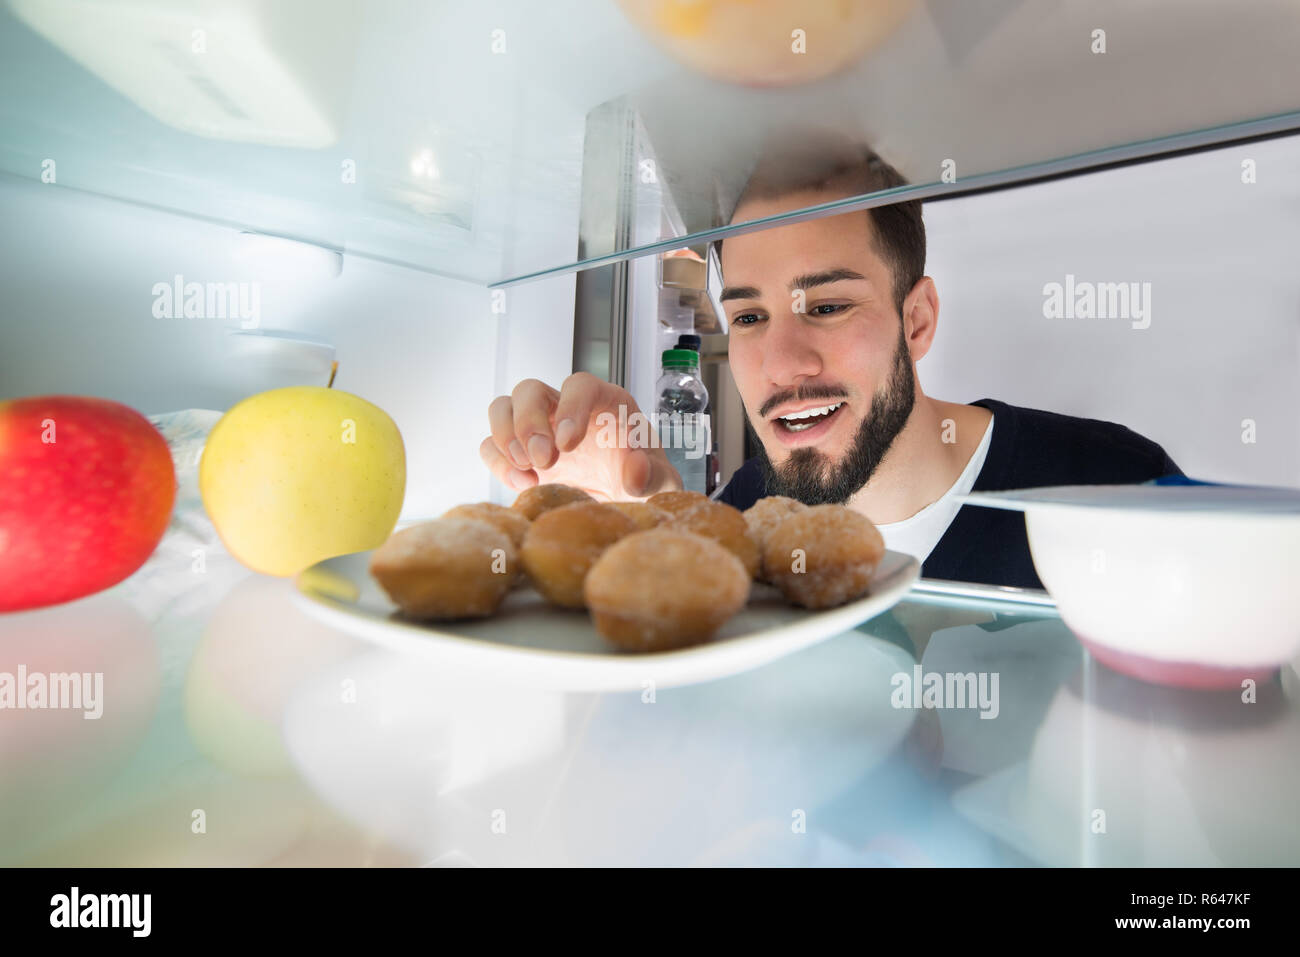 Man Taking Cookie From Plate In Refrigerator Stock Photo